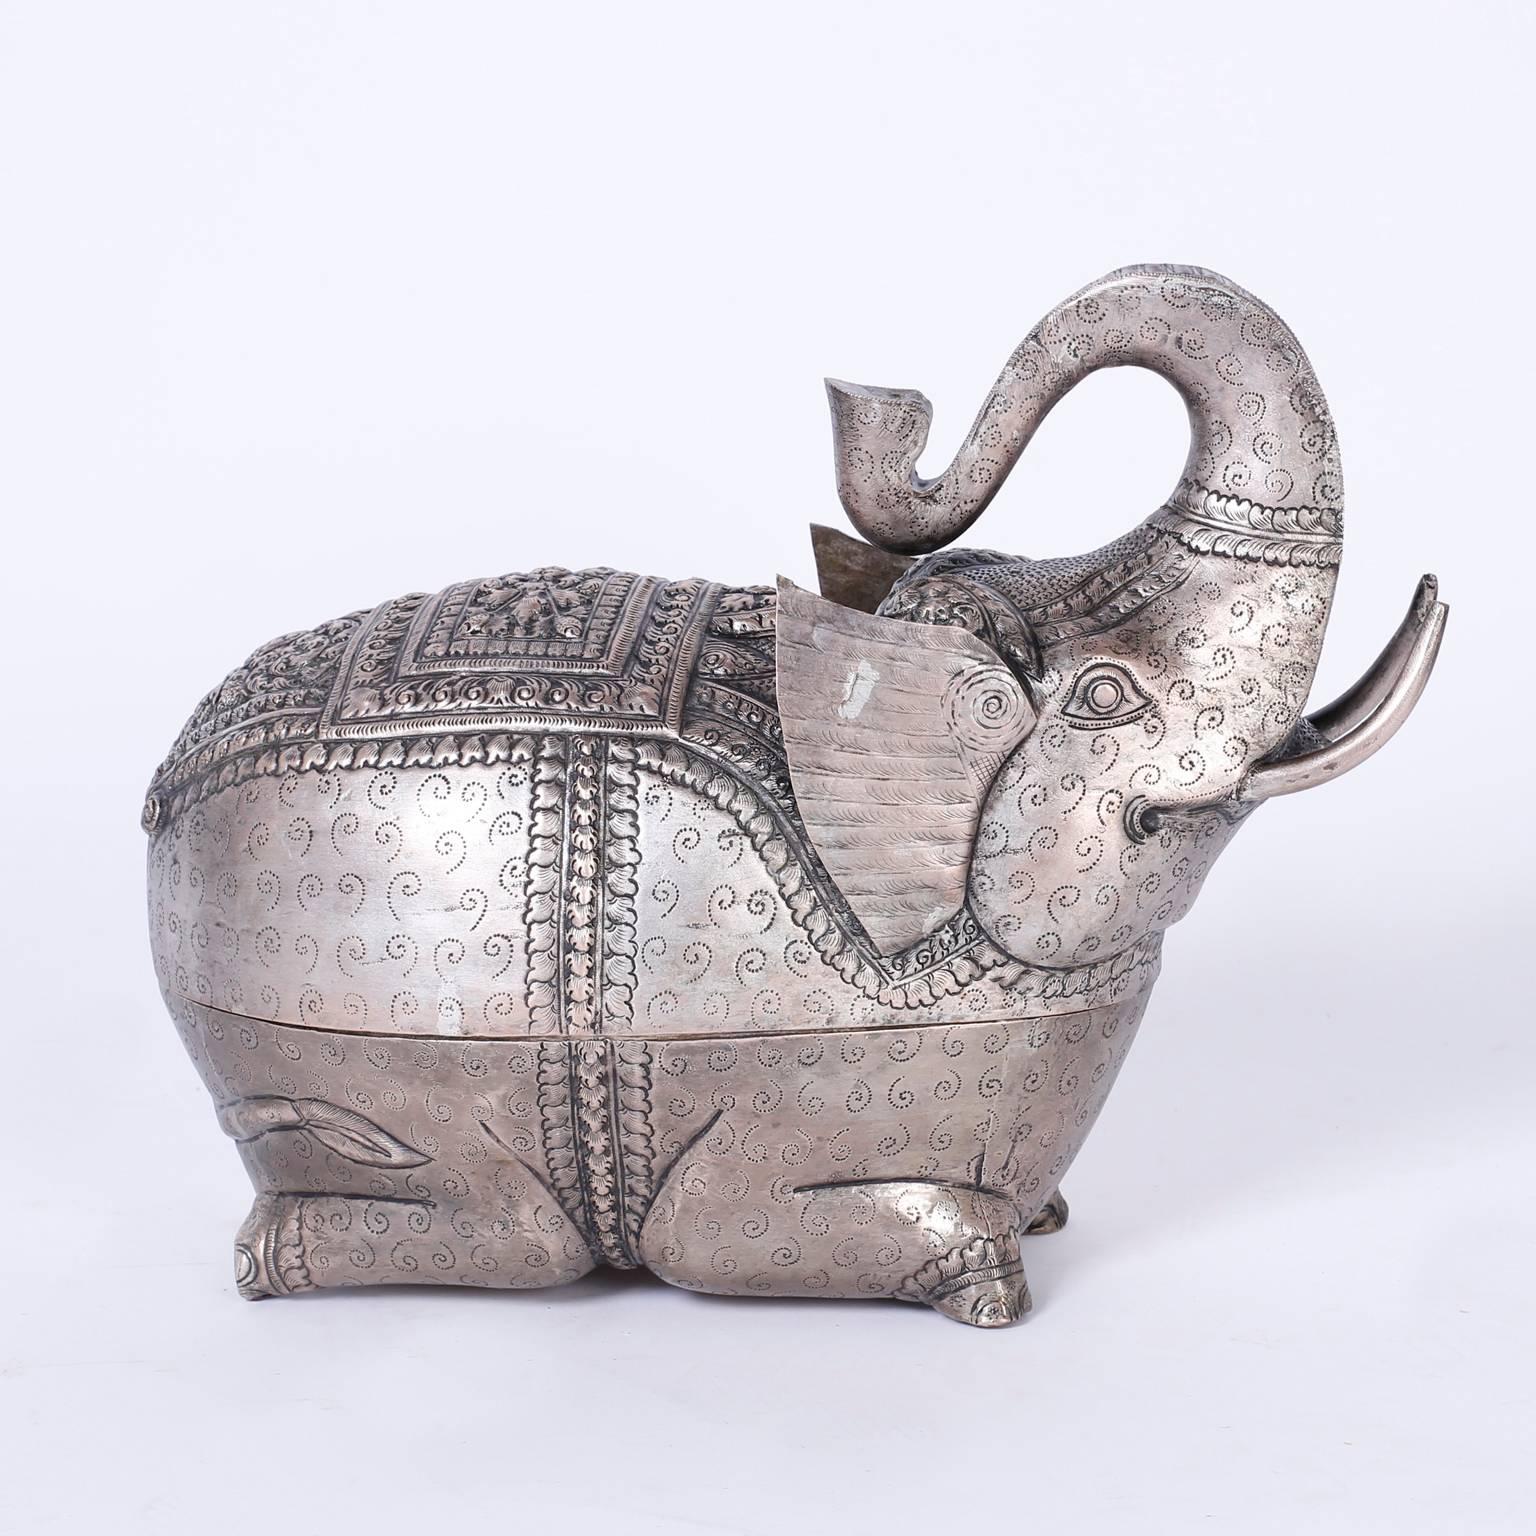 Folky silvered metal elephant handcrafted with an amusing form while hammered, etched and inscribed. Unexpectedly opens as a trinket box.